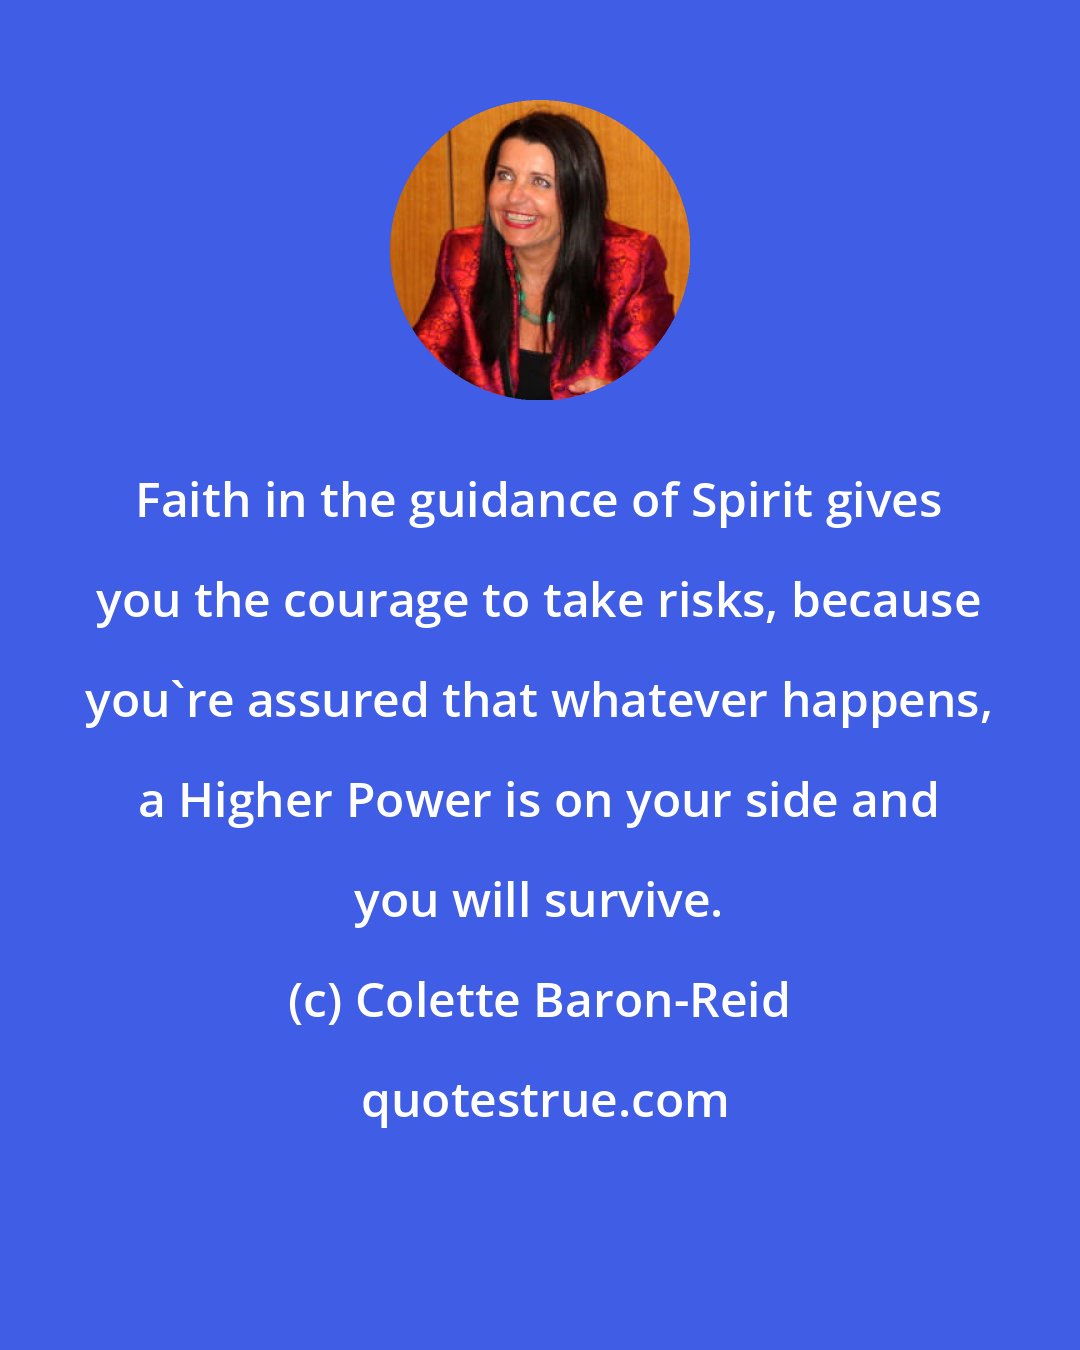 Colette Baron-Reid: Faith in the guidance of Spirit gives you the courage to take risks, because you're assured that whatever happens, a Higher Power is on your side and you will survive.